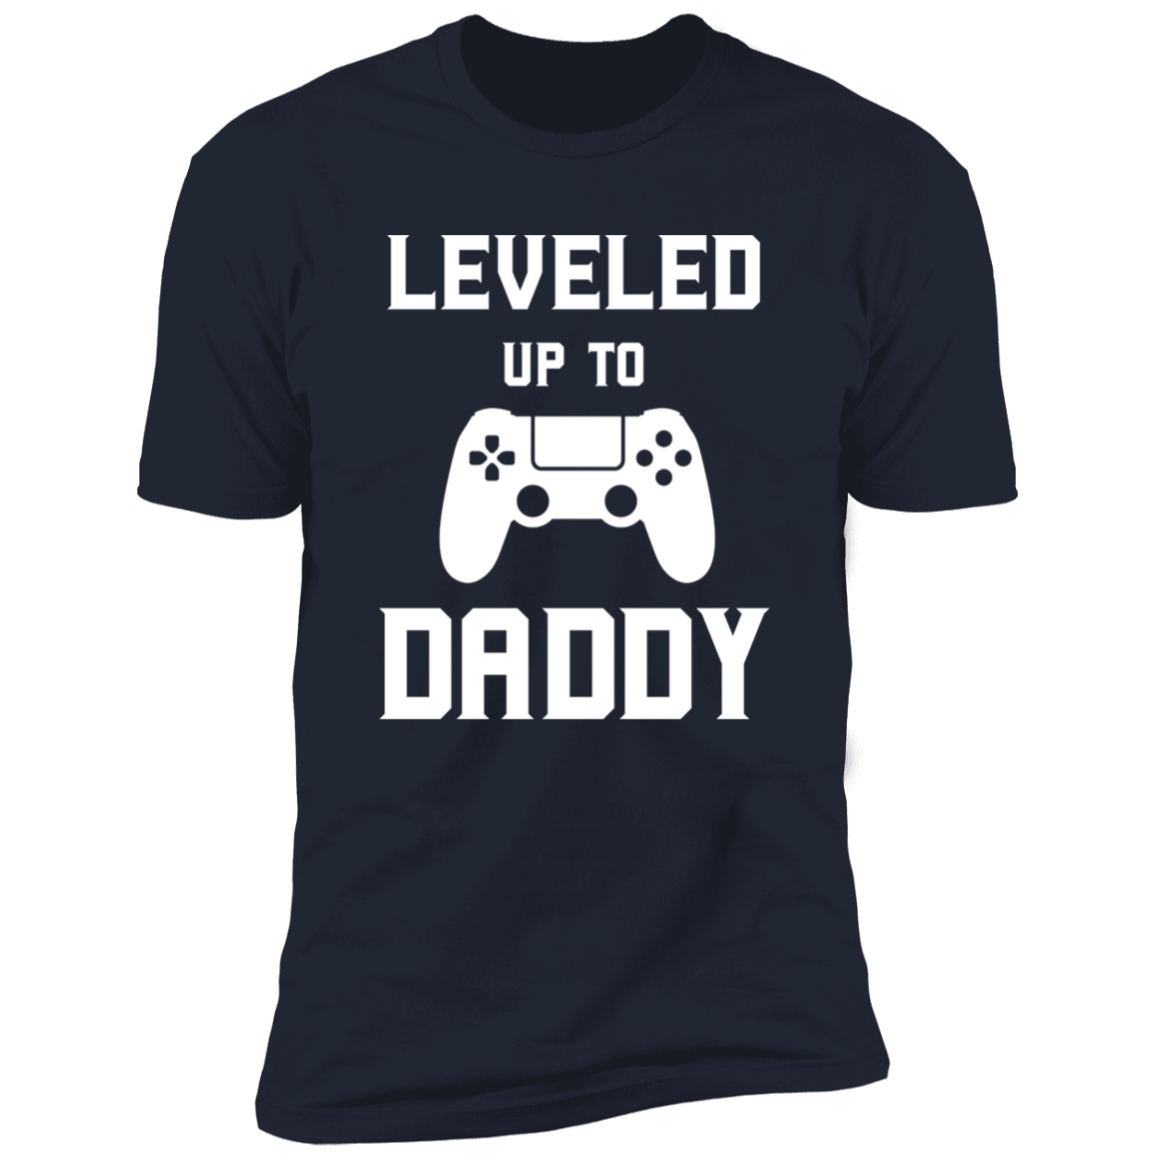 Leveled Up to Daddy T-Shirt